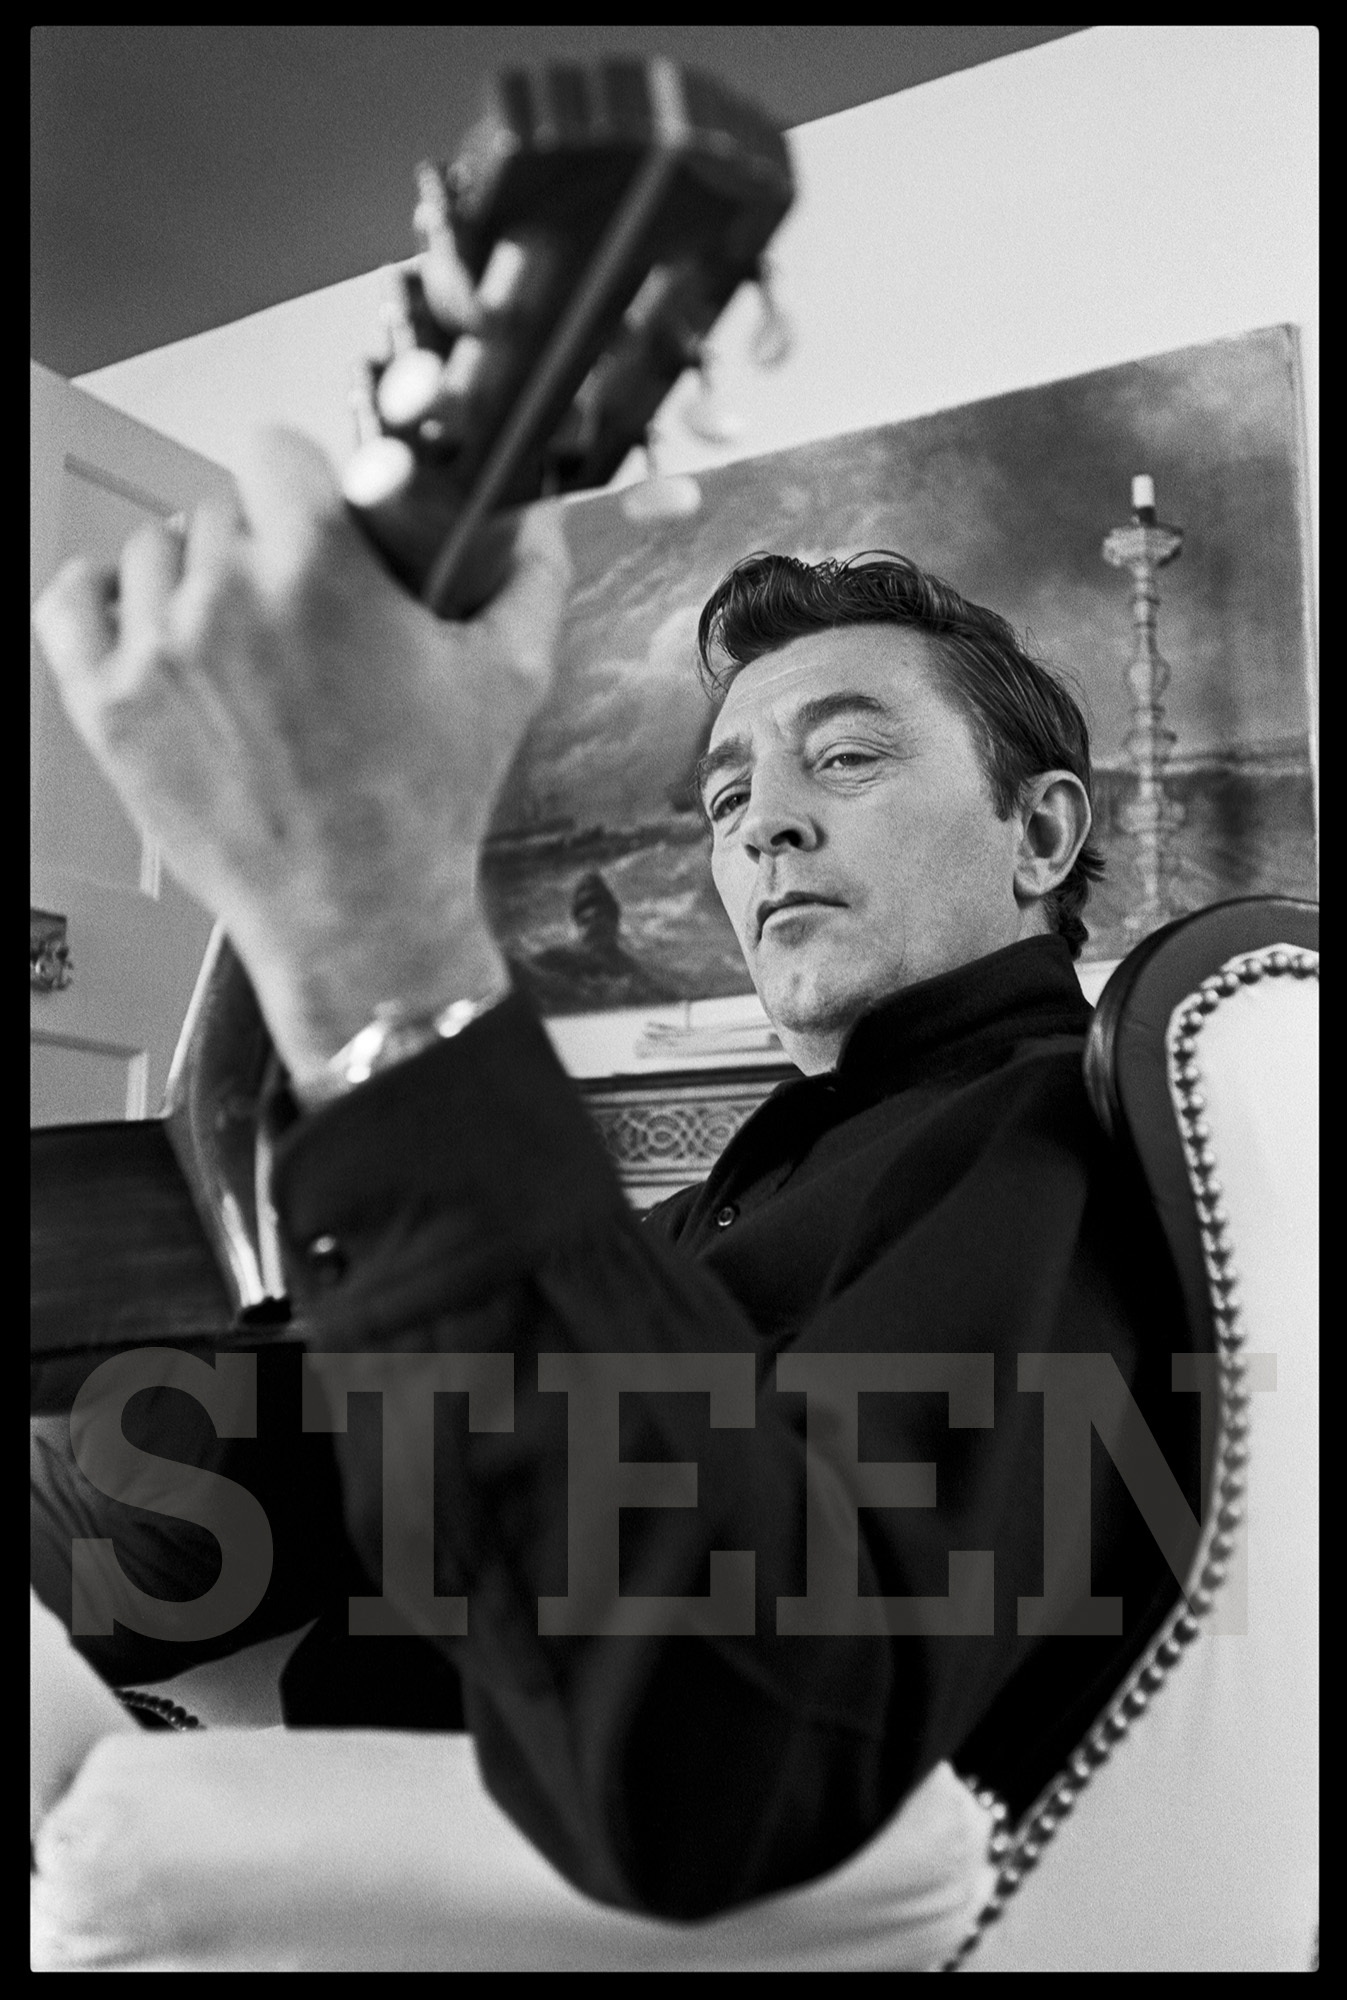 A fine art colour photograph of American Actor Robert Mitchum by British Photographer David Steen. Exclusive limited edition fine art photographic prints.